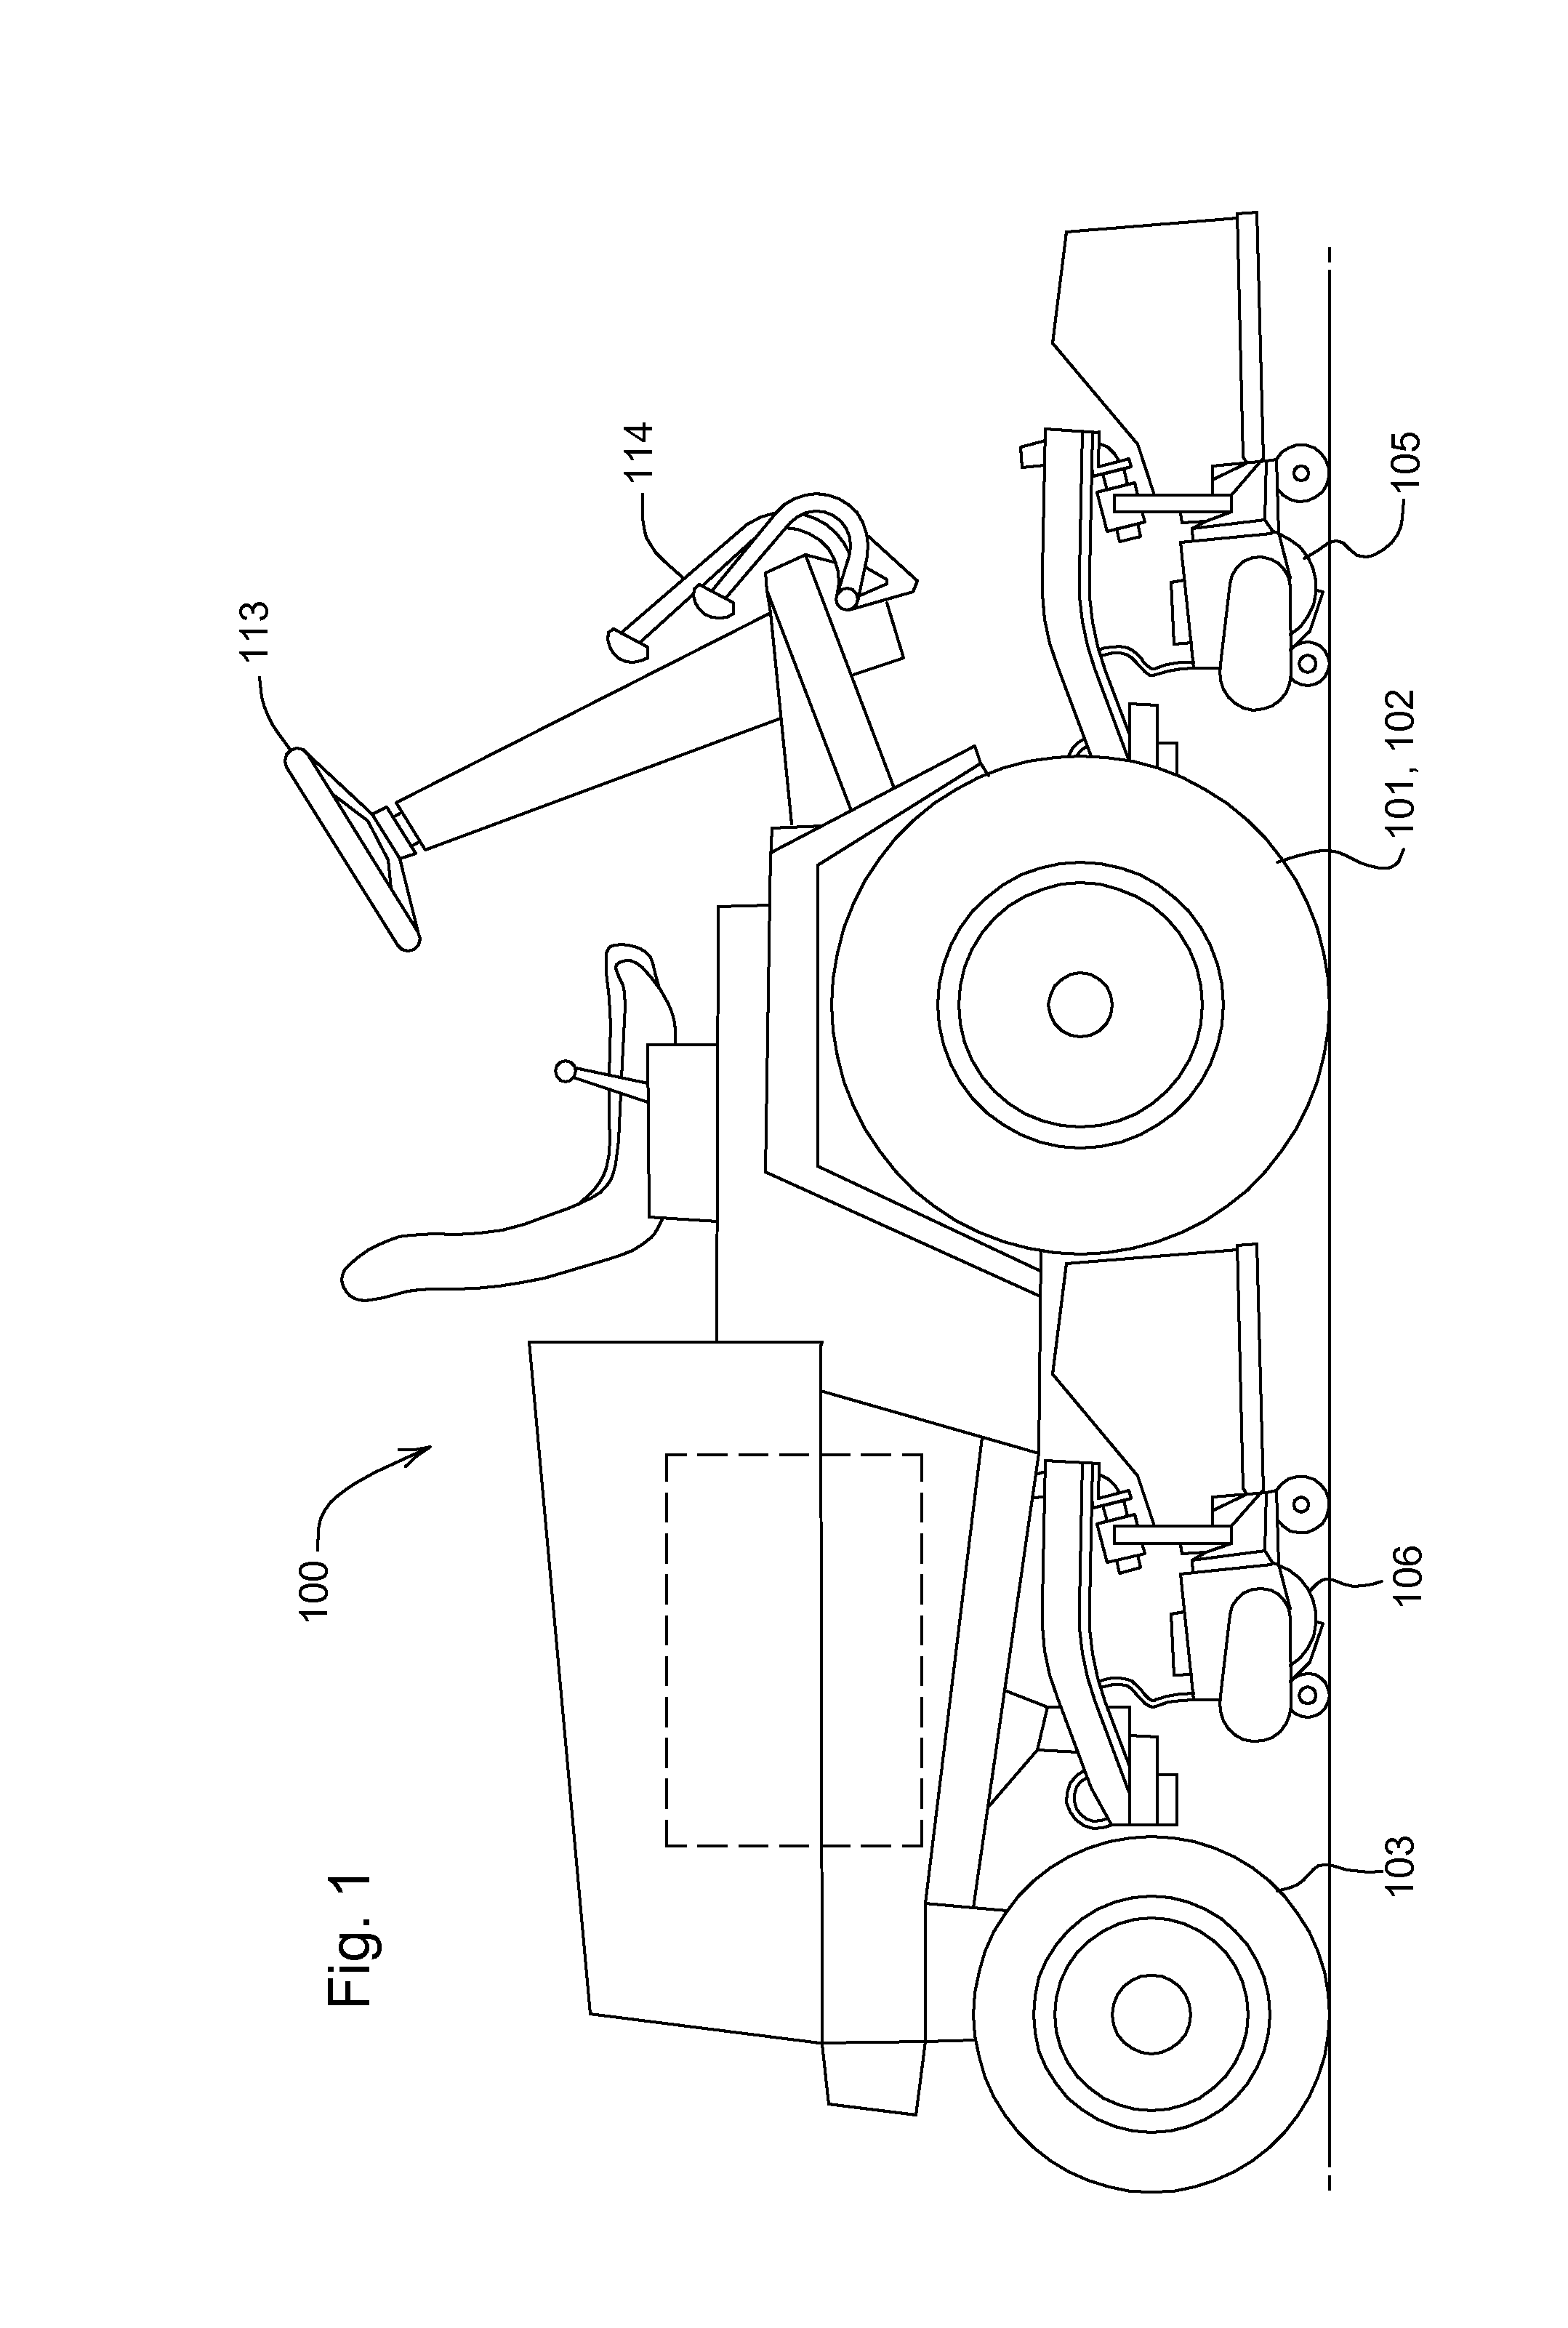 Differential Steering and Traction Control For Electrically Propelled Mower